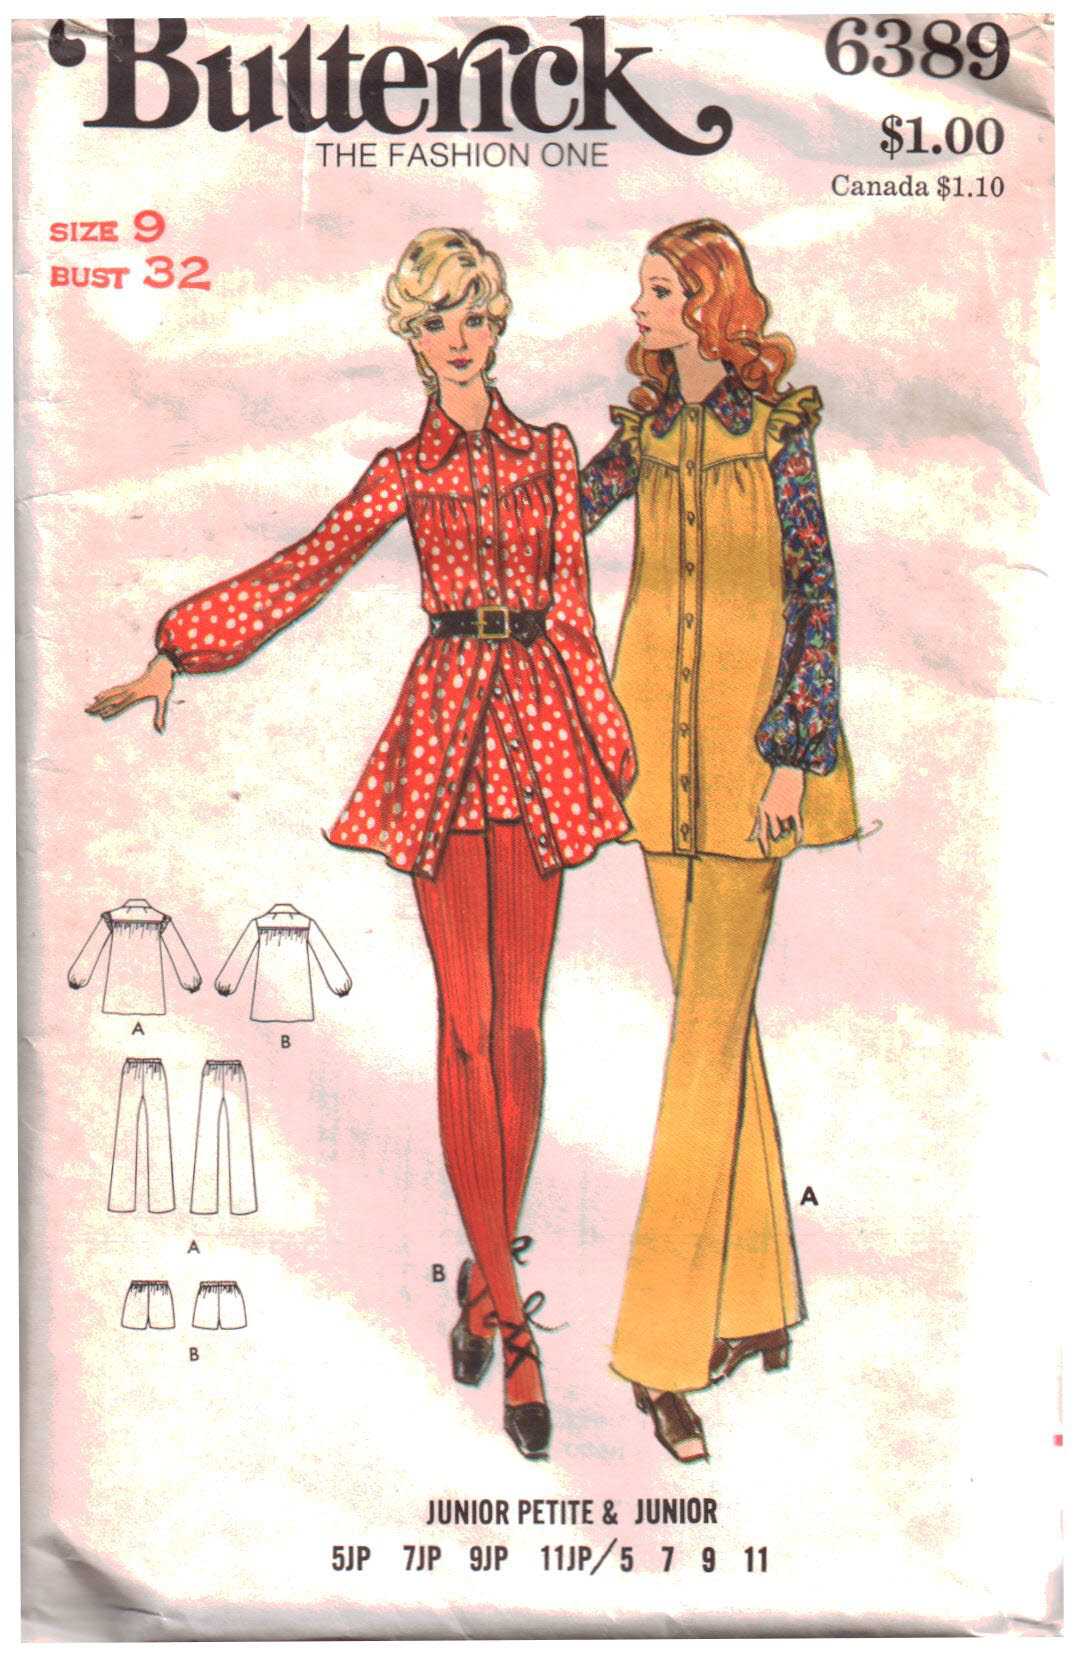 Sew easy pants for Ken w/free PDF sewing patterns @ ChellyWood.com  #DollClothesPatterns #KenDolls - Free Doll Clothes Patterns